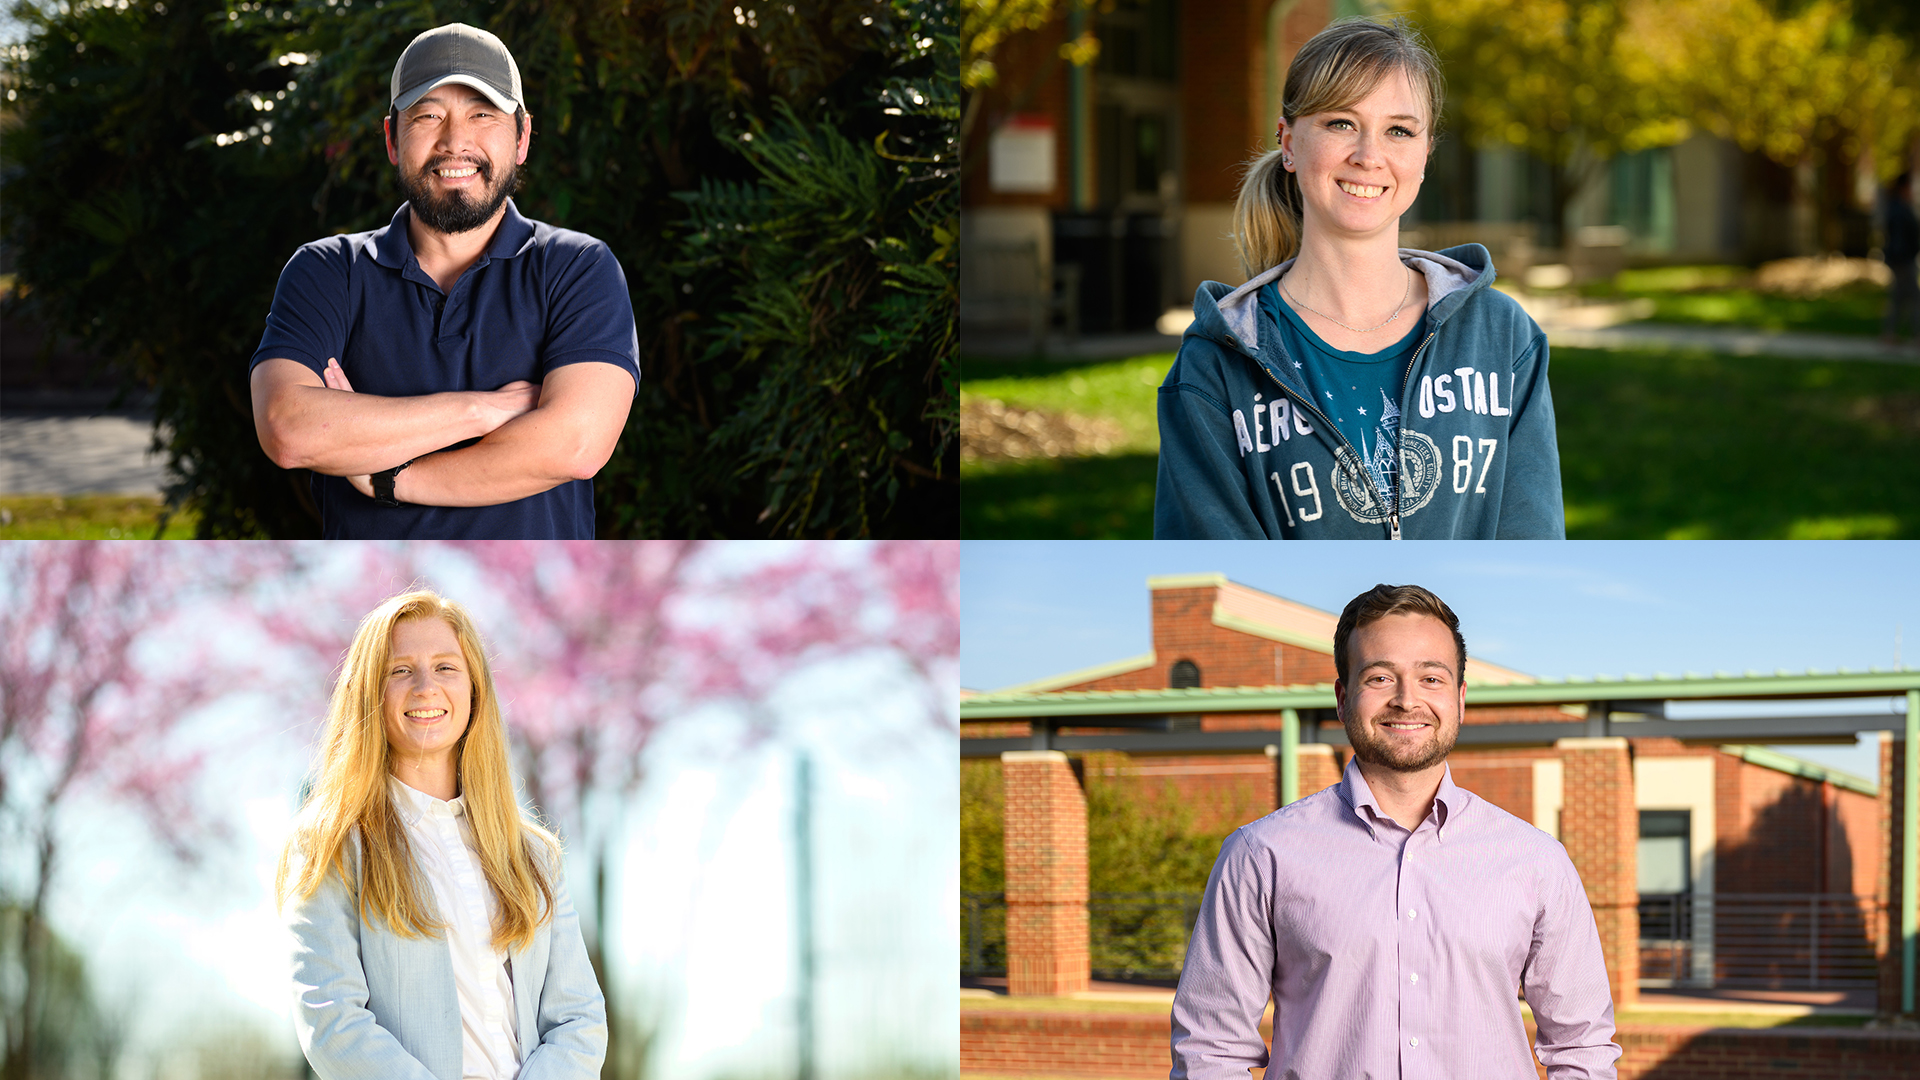 A four-part grid featuring student veterans from the NC State College of Veterinary Medicine.